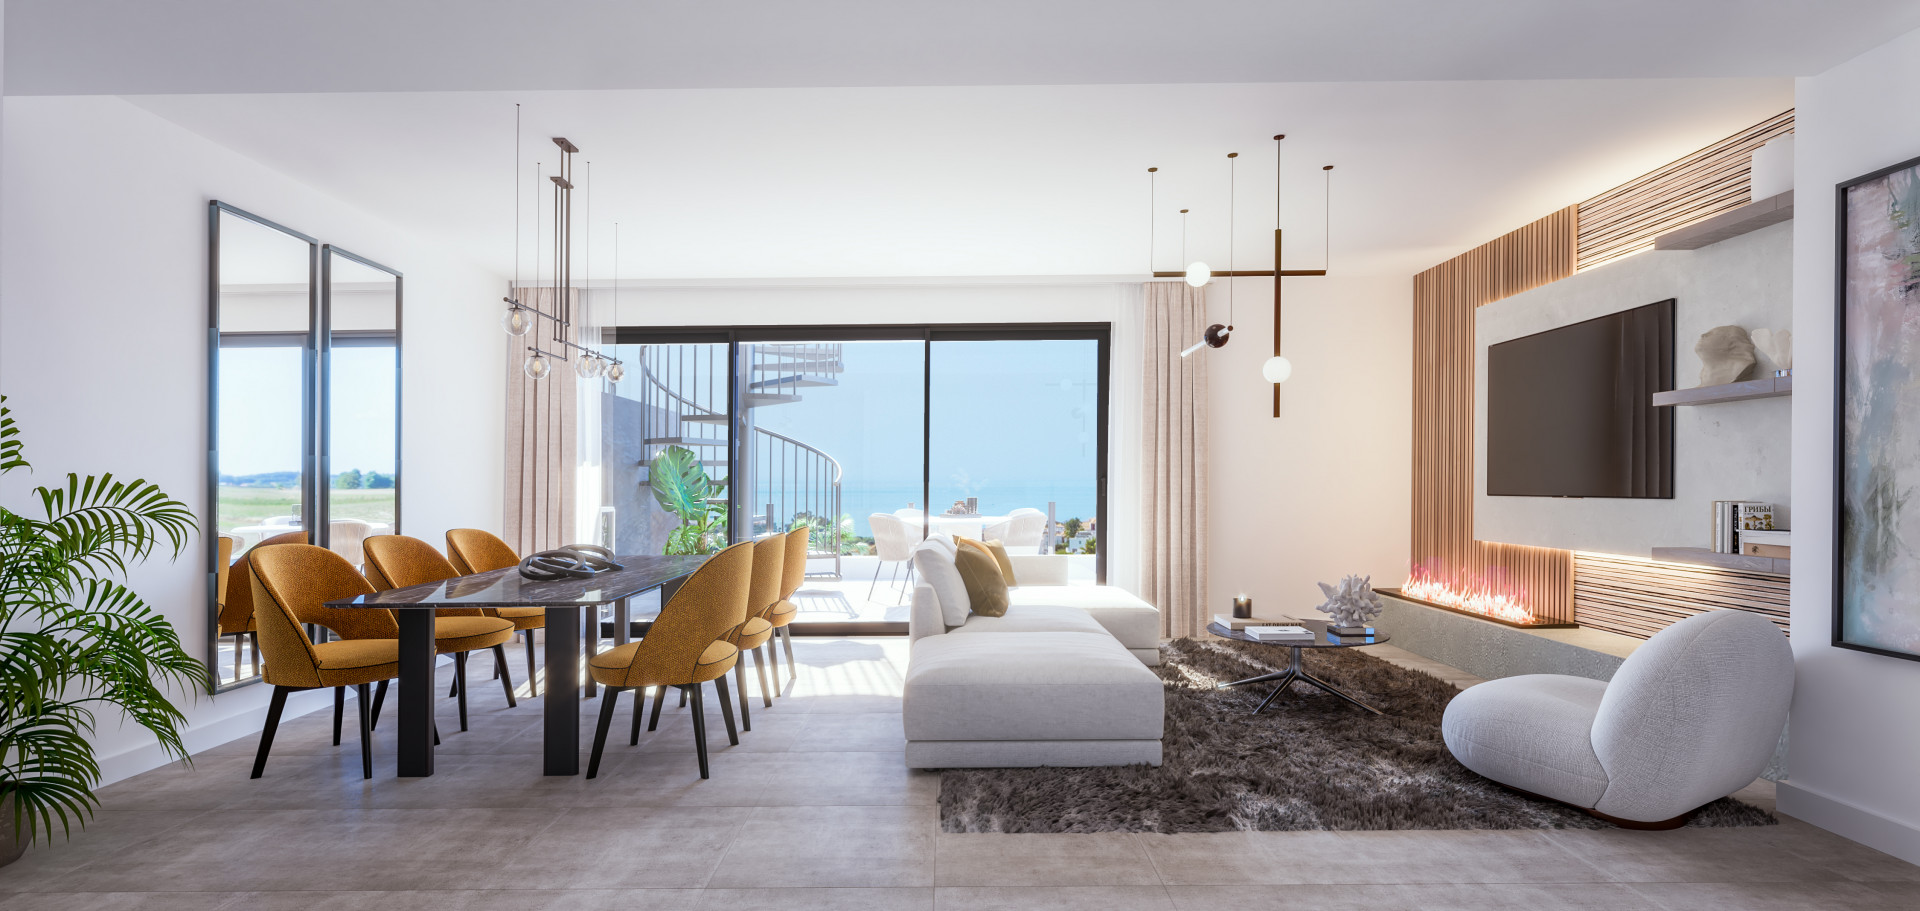 Oasis 325 Phase II: 2 and 3 bedroom apartments in the area of La Resina, Estepona. | Image 9